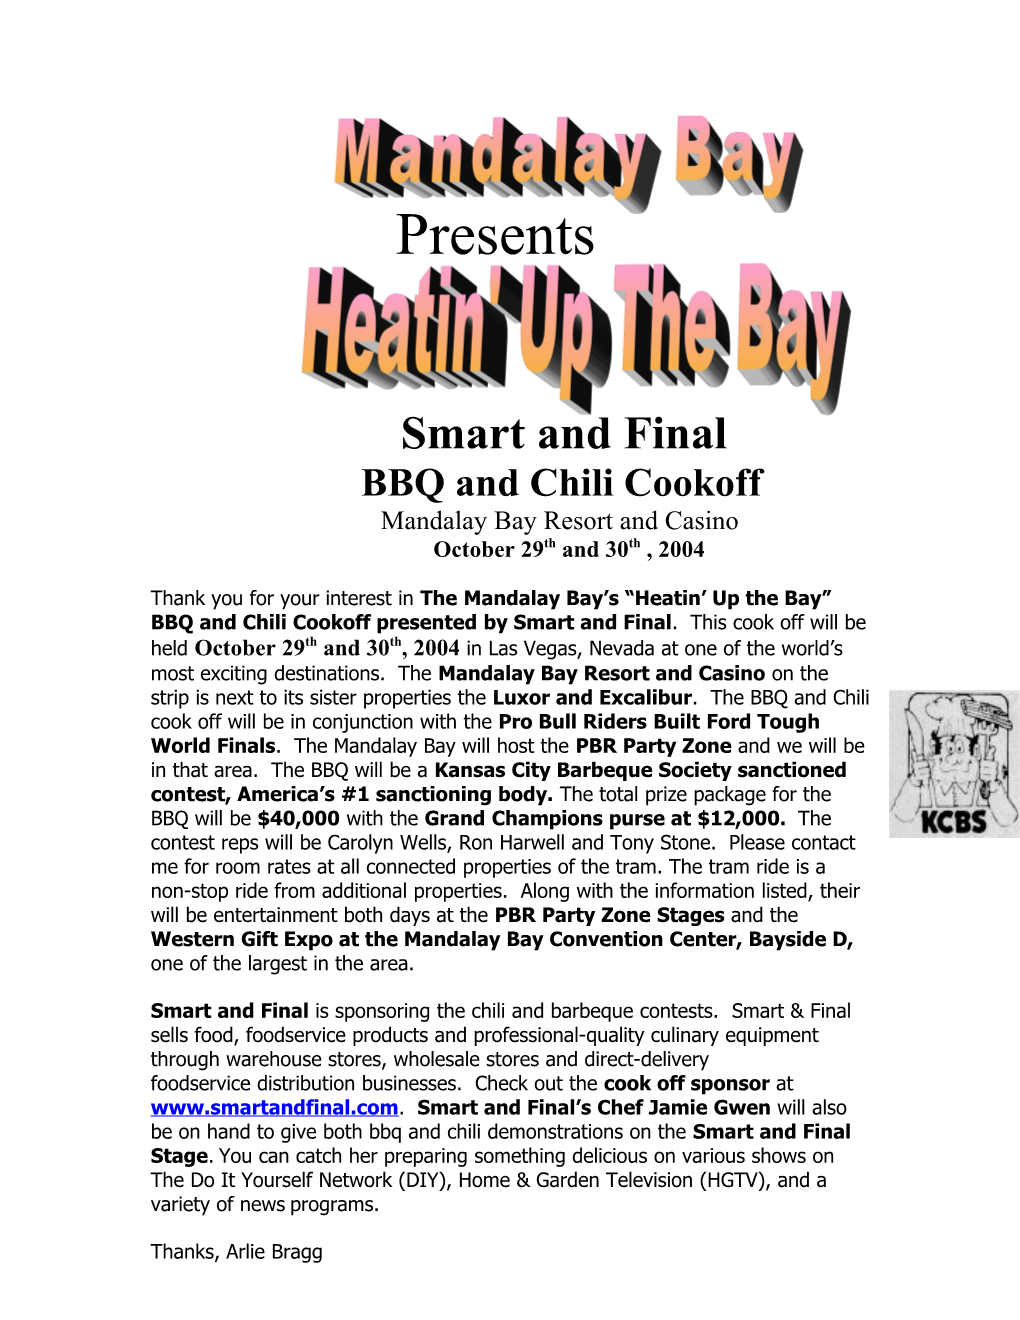 BBQ and Chili Cookoff